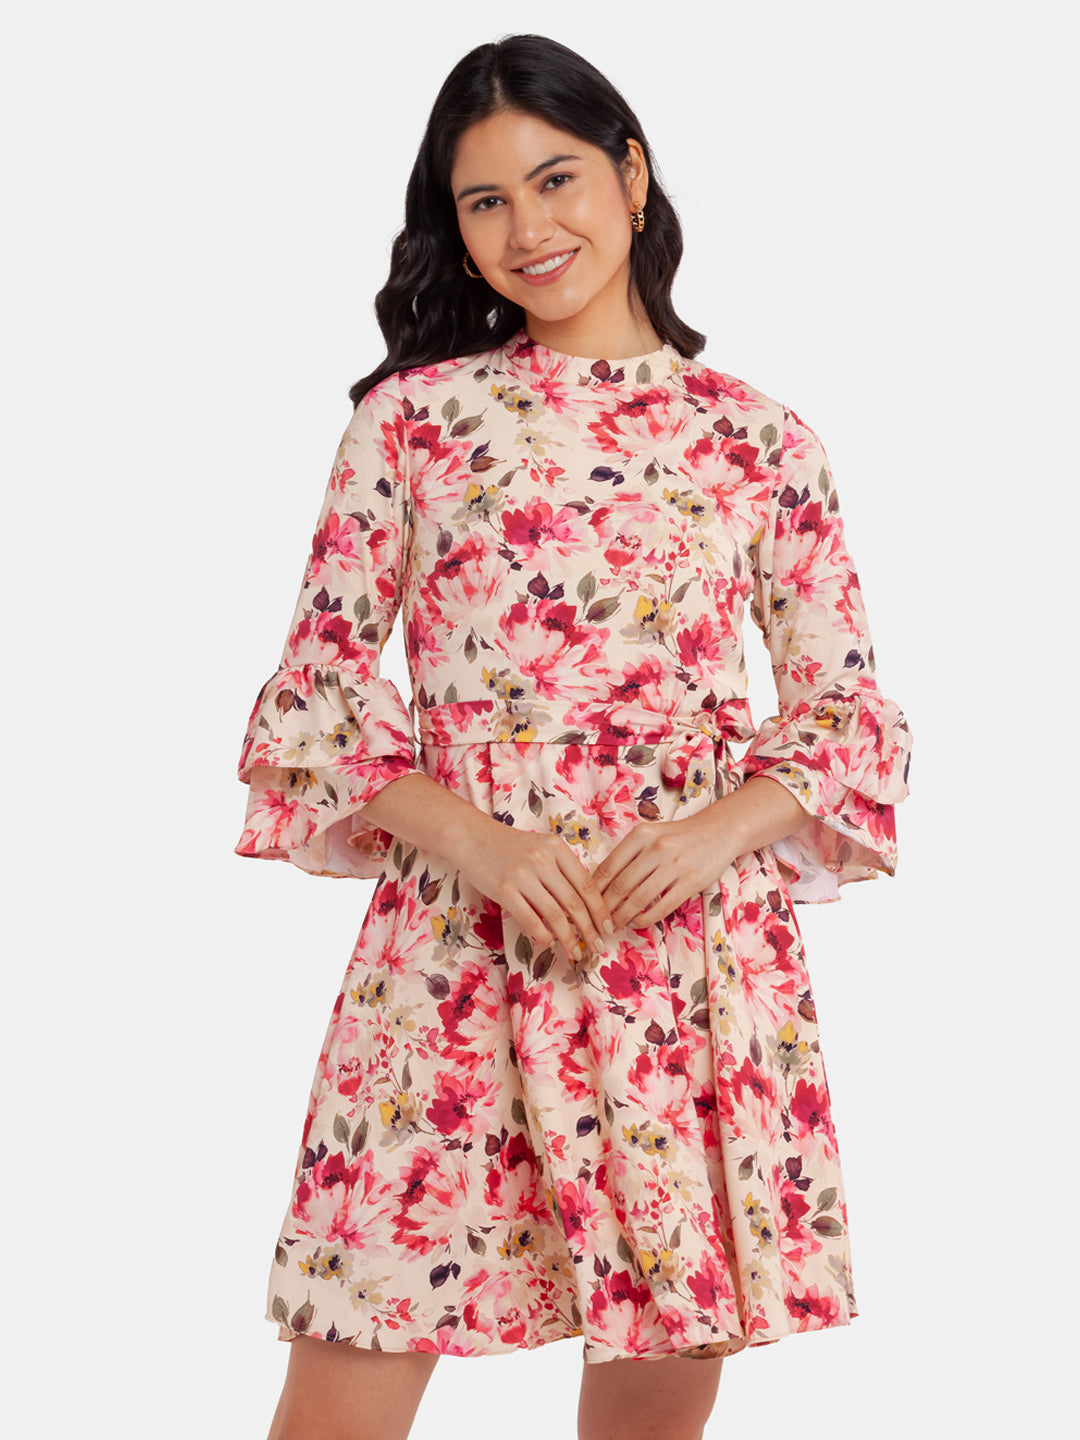 Off White Printed Tie-Up Short Dress For Women